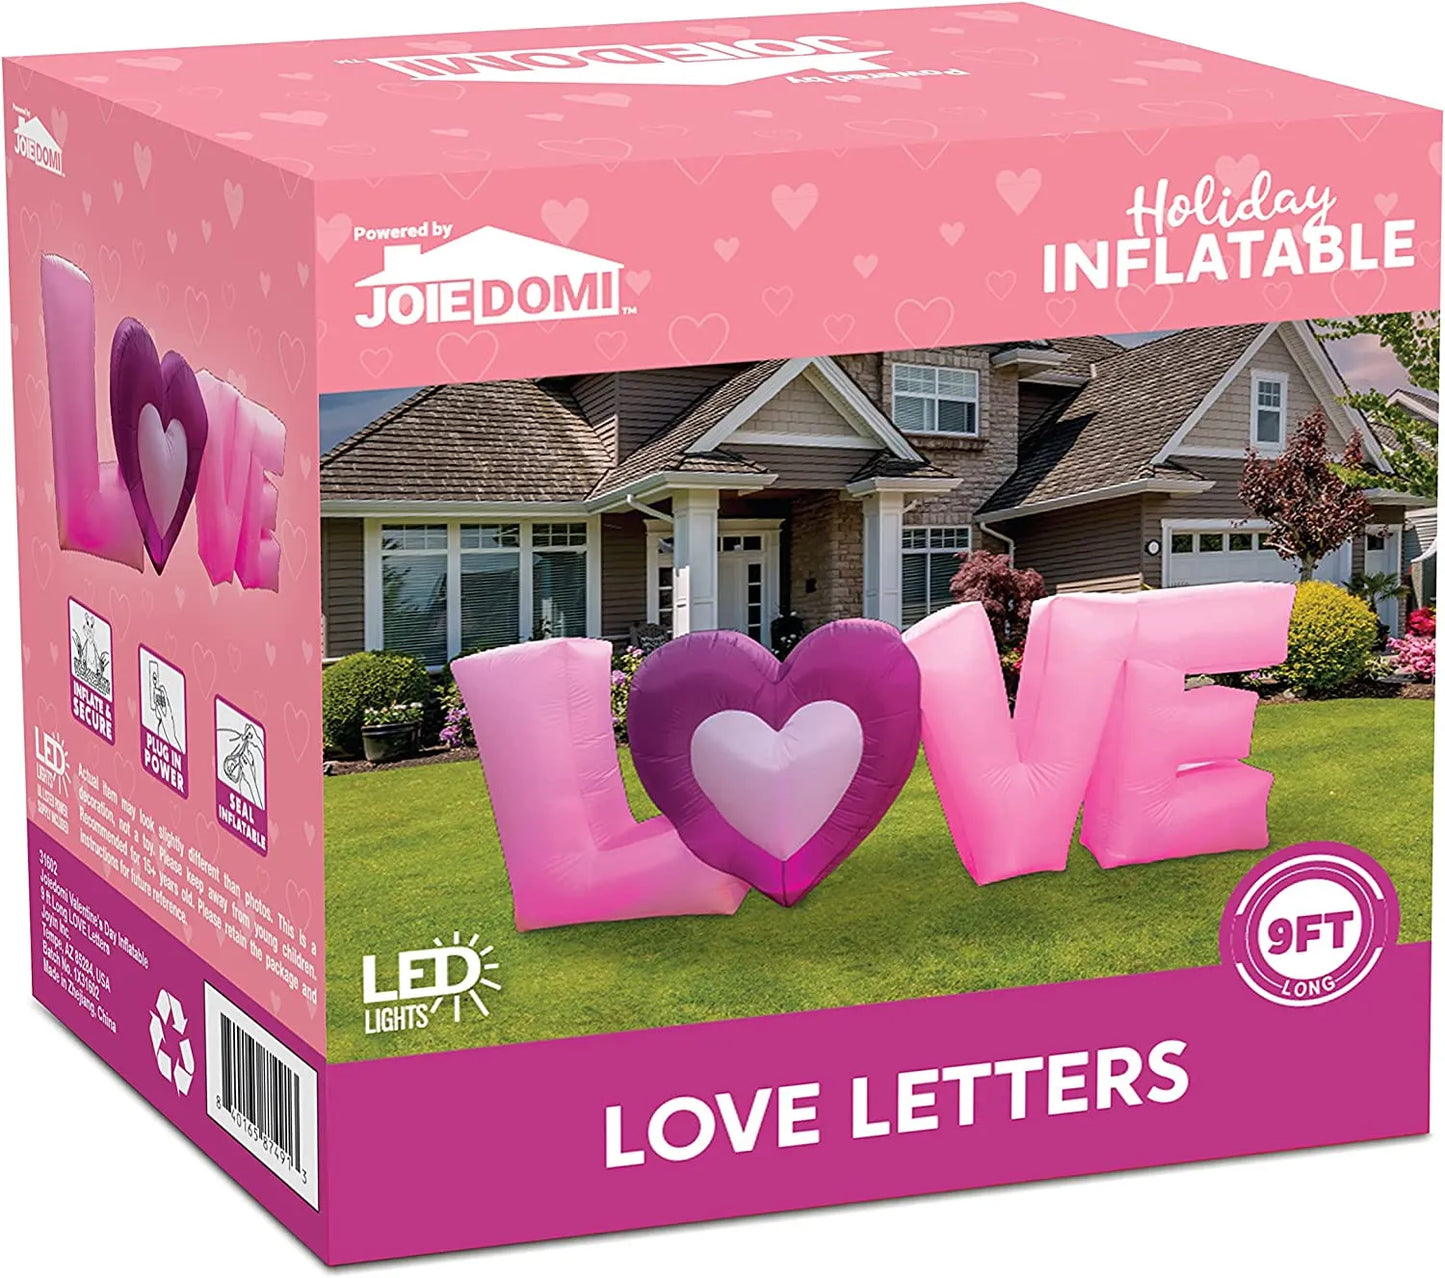 9 FT Inflatable Love Letters with LED Lights